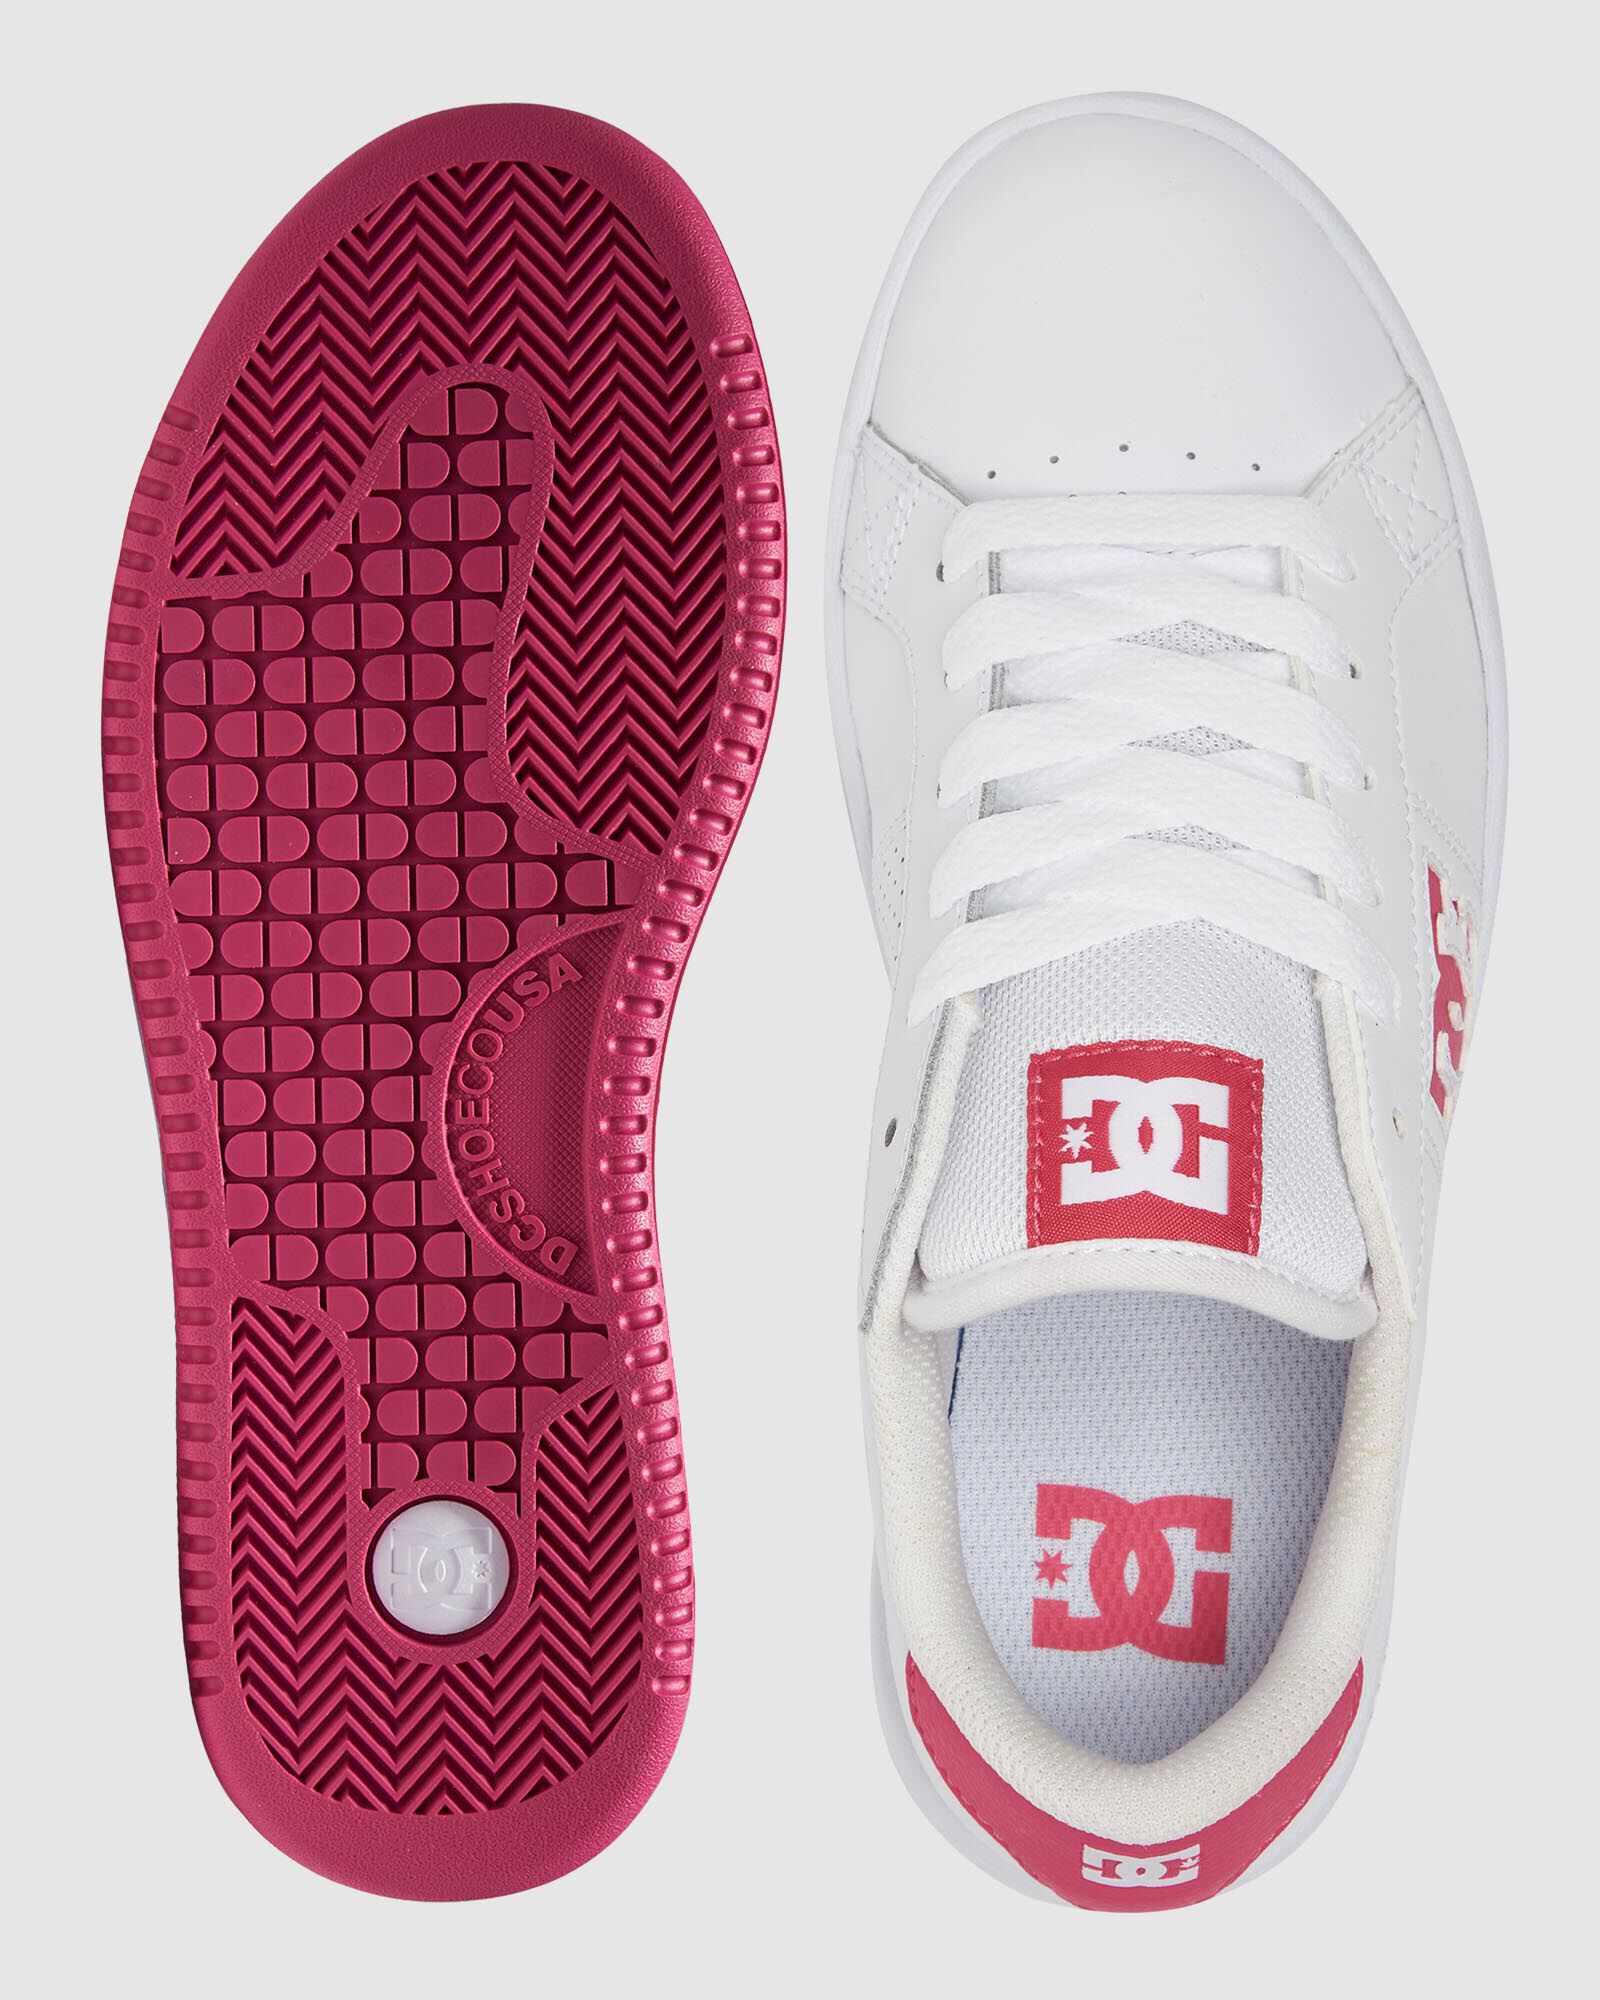 DC Shoes WOMEN'S GAVELER-LEATHER SHOES SNEAKER